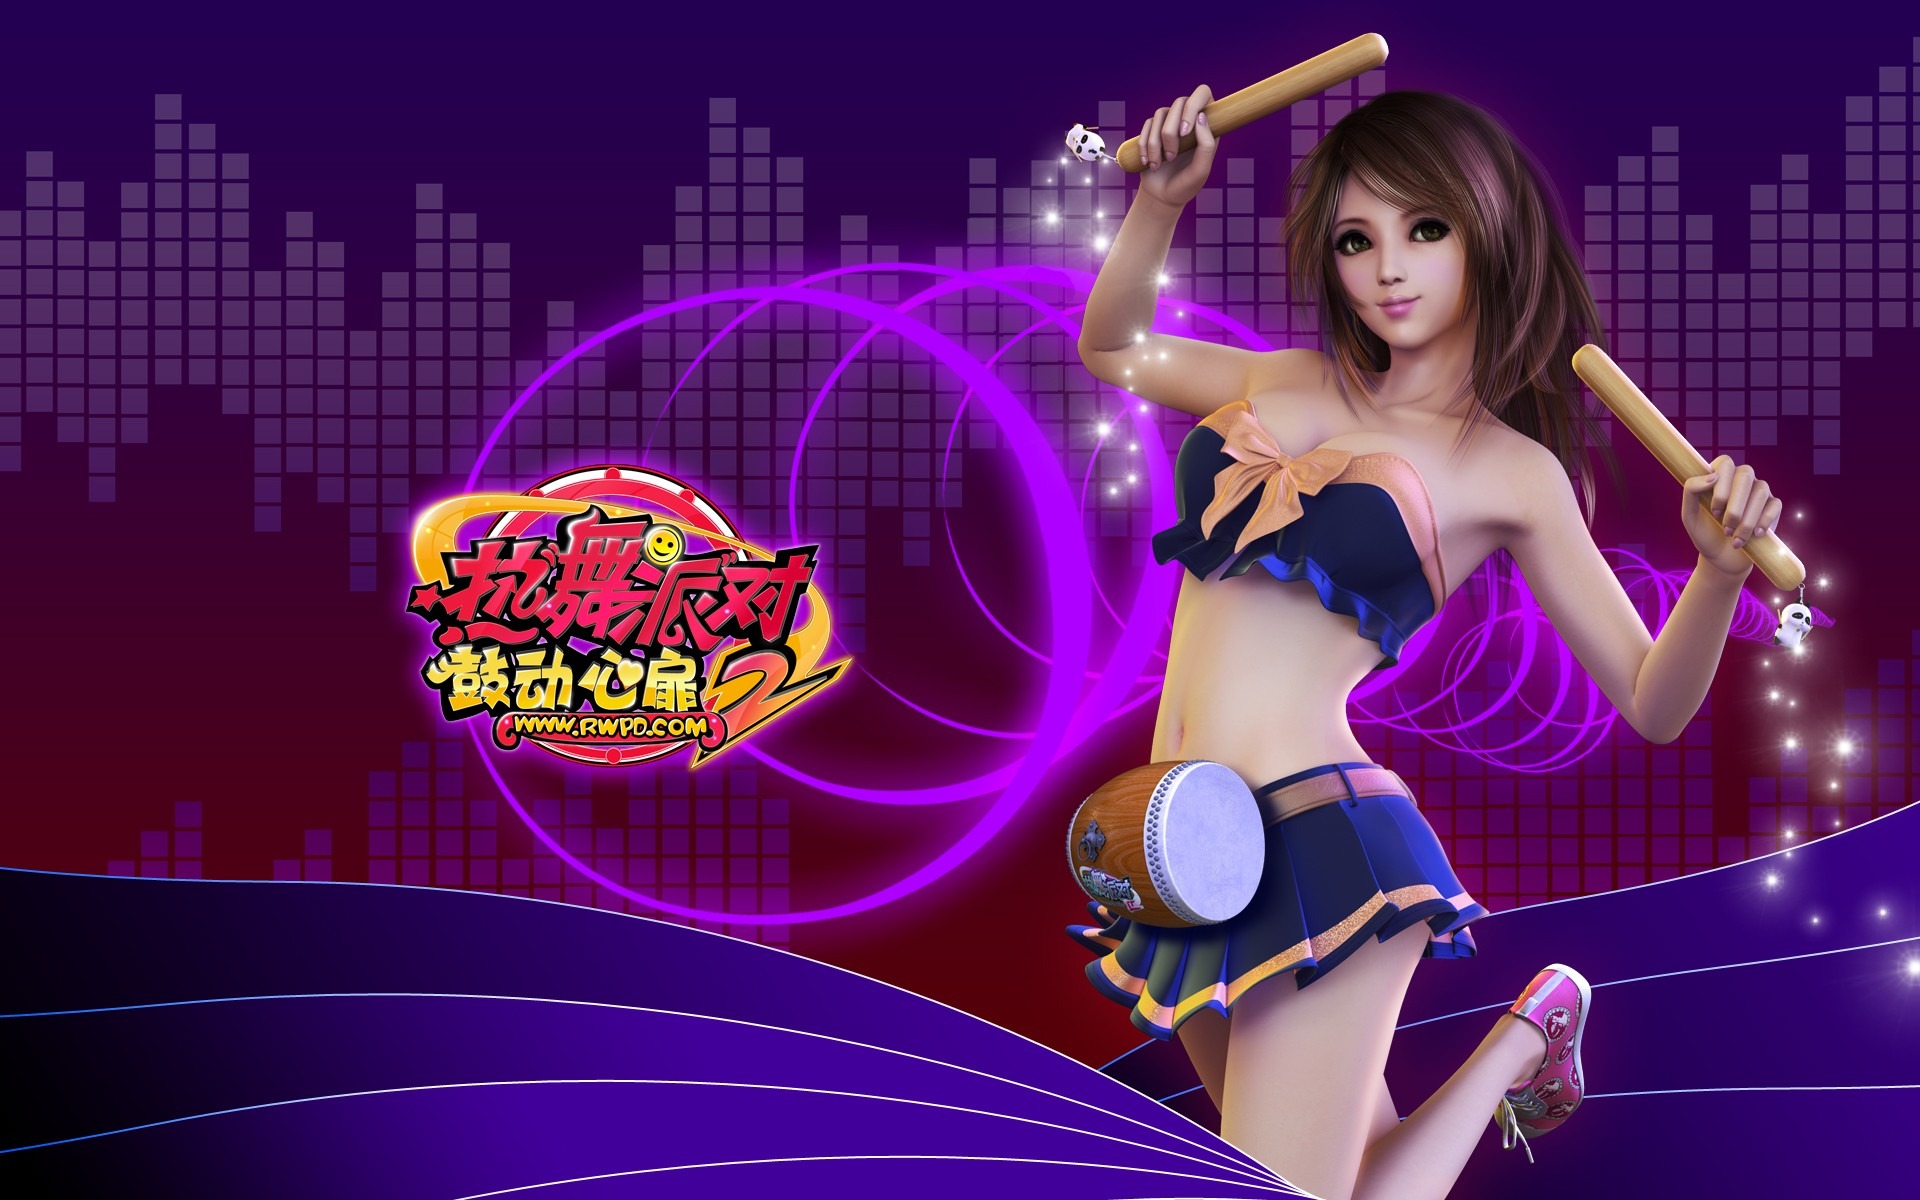 Online game Hot Dance Party II official wallpapers #17 - 1920x1200